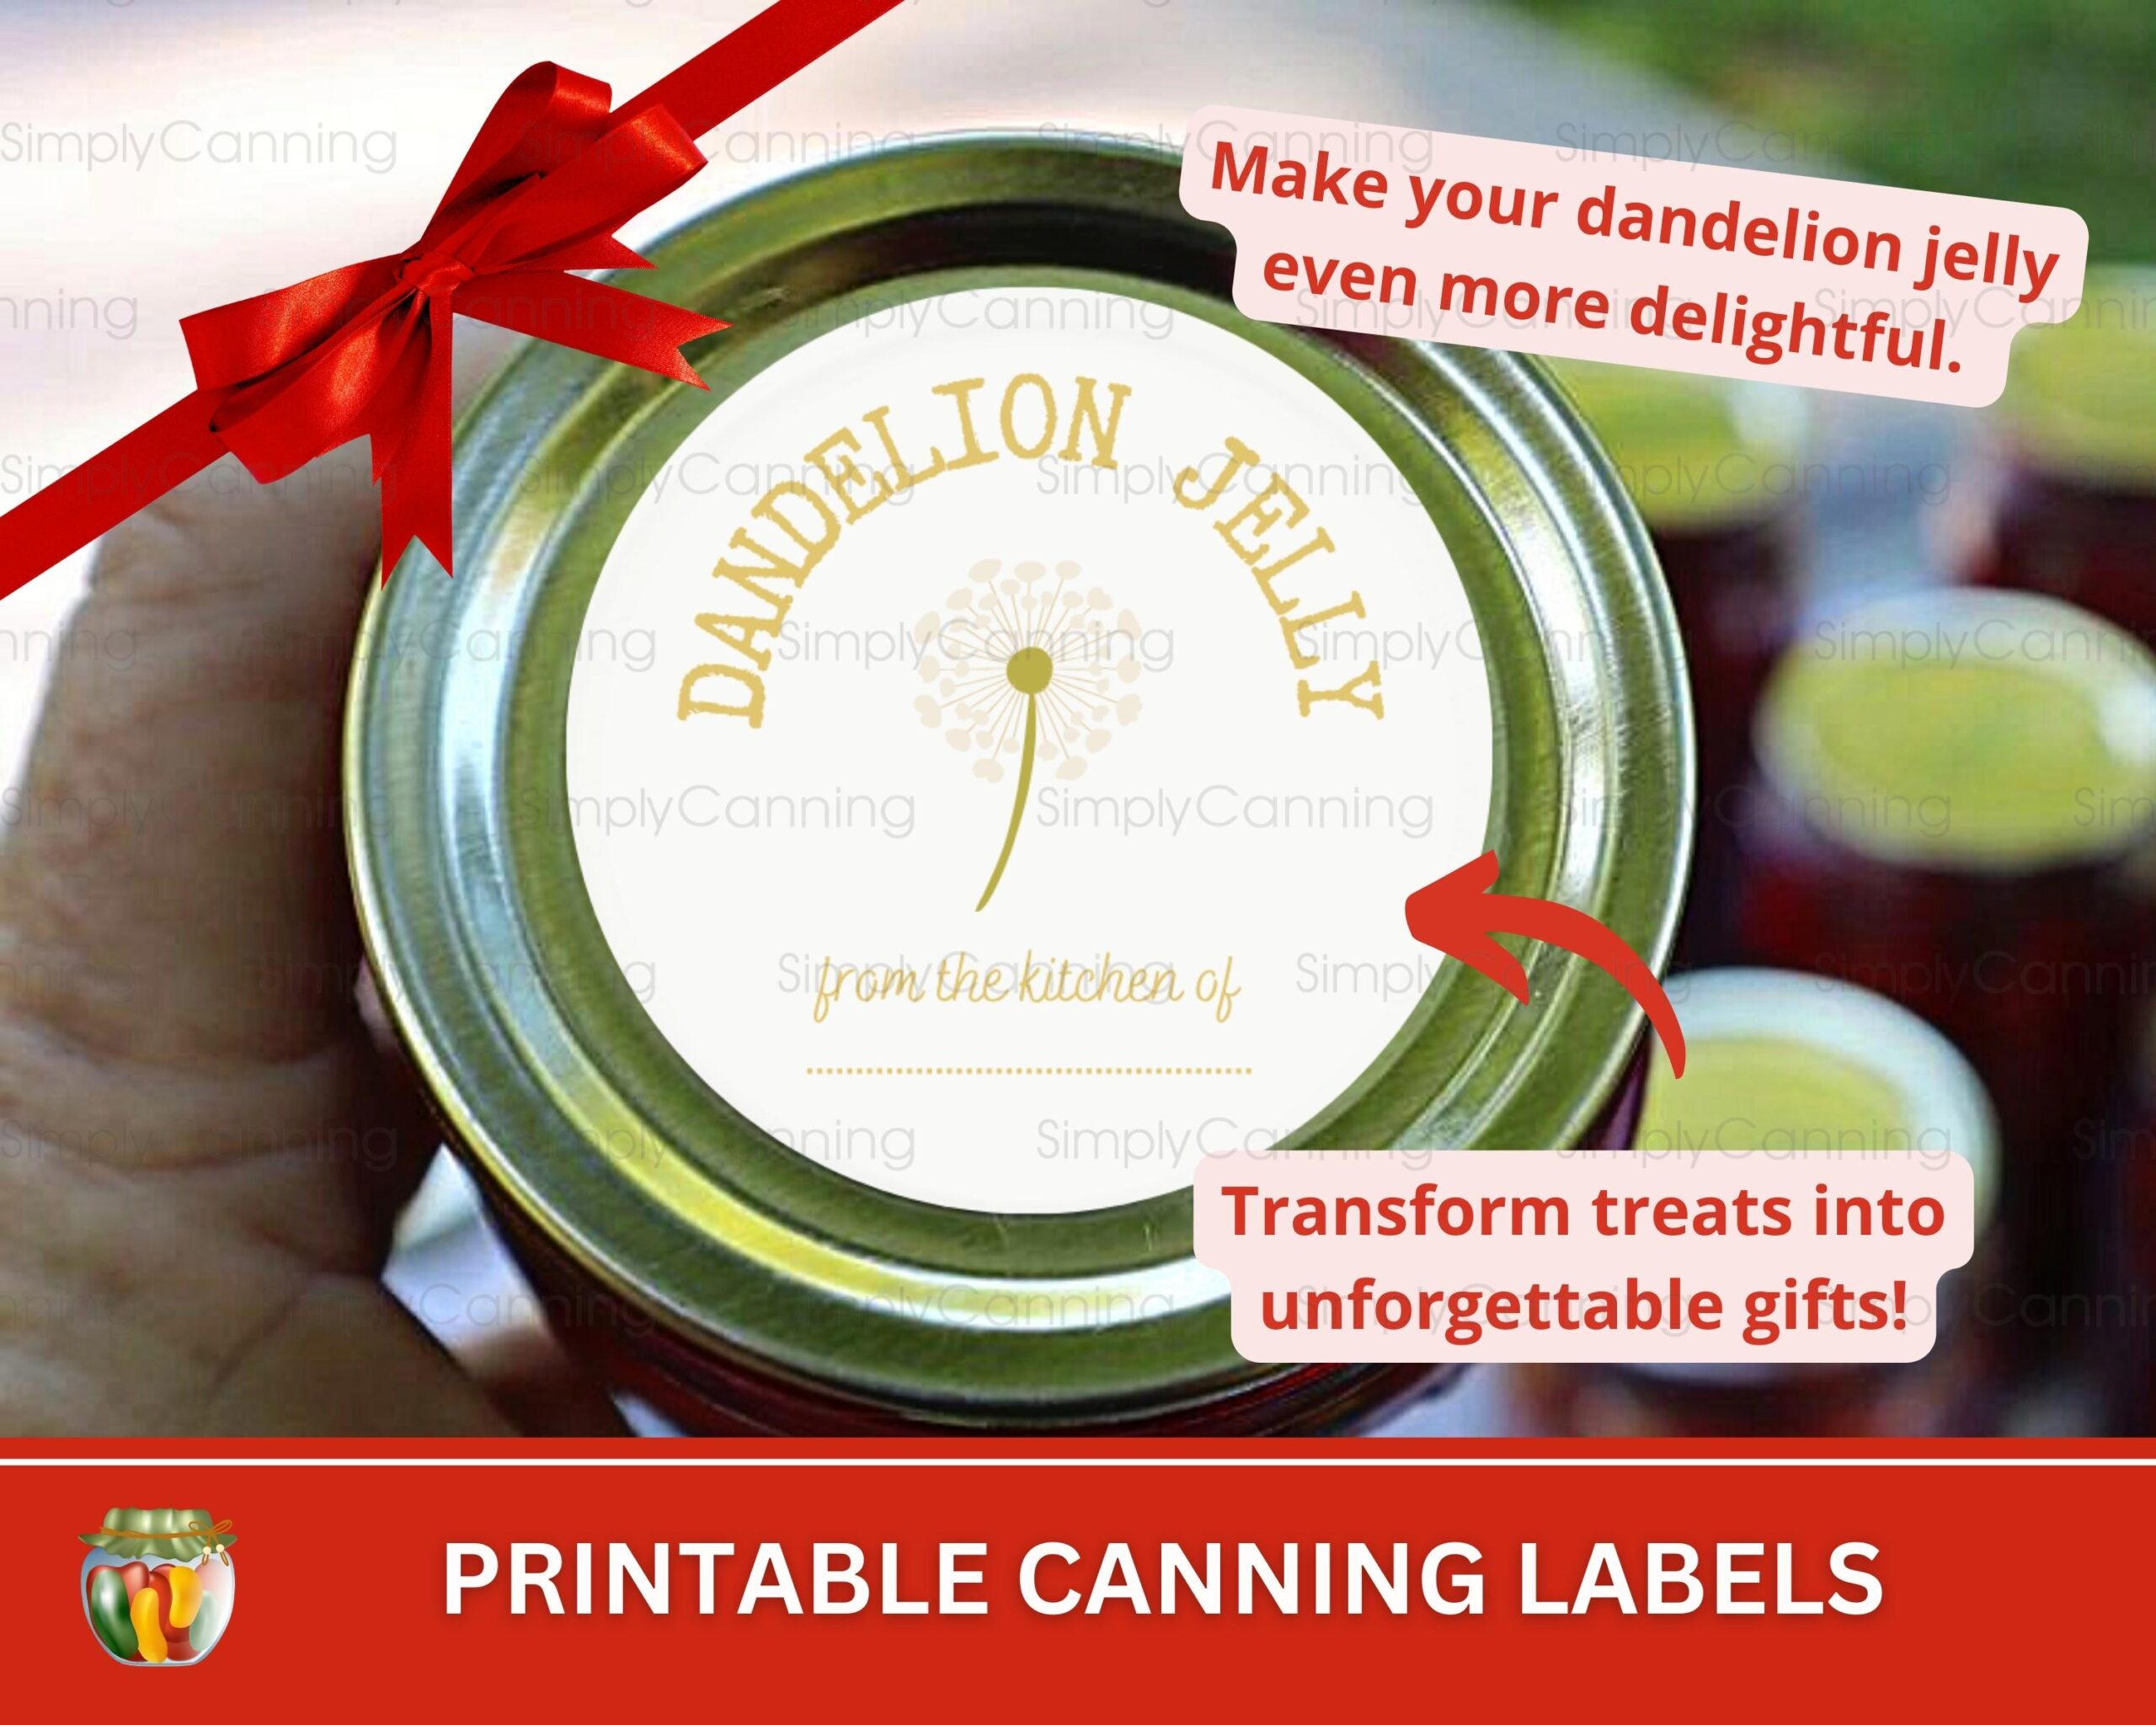 Image of dandelion jelly canning label, links to printable canning labels to purchase.